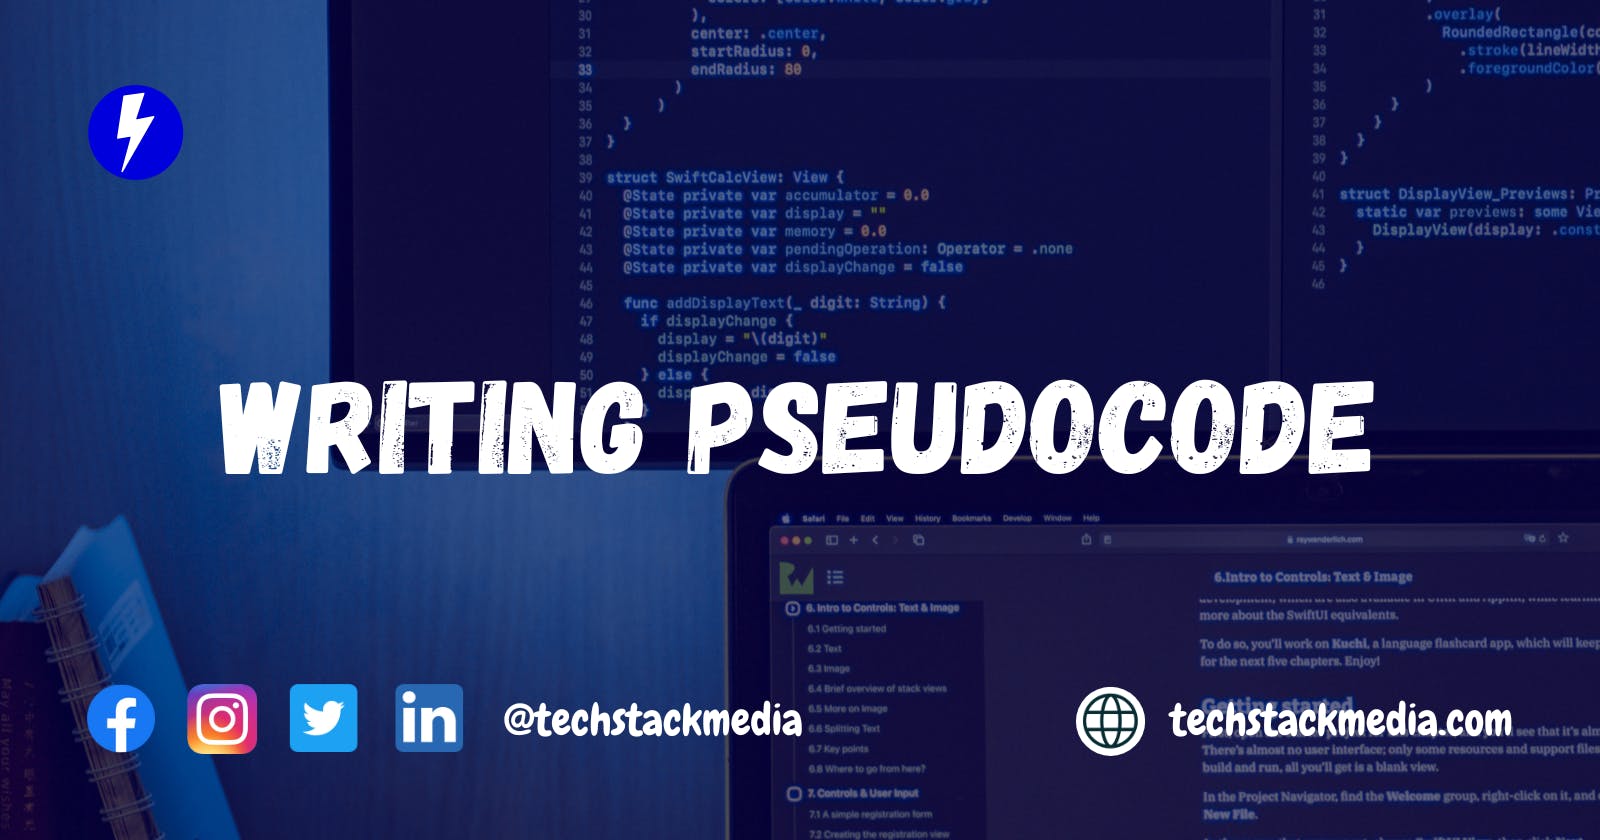 Writing Pseudocode: A Beginner's Guide